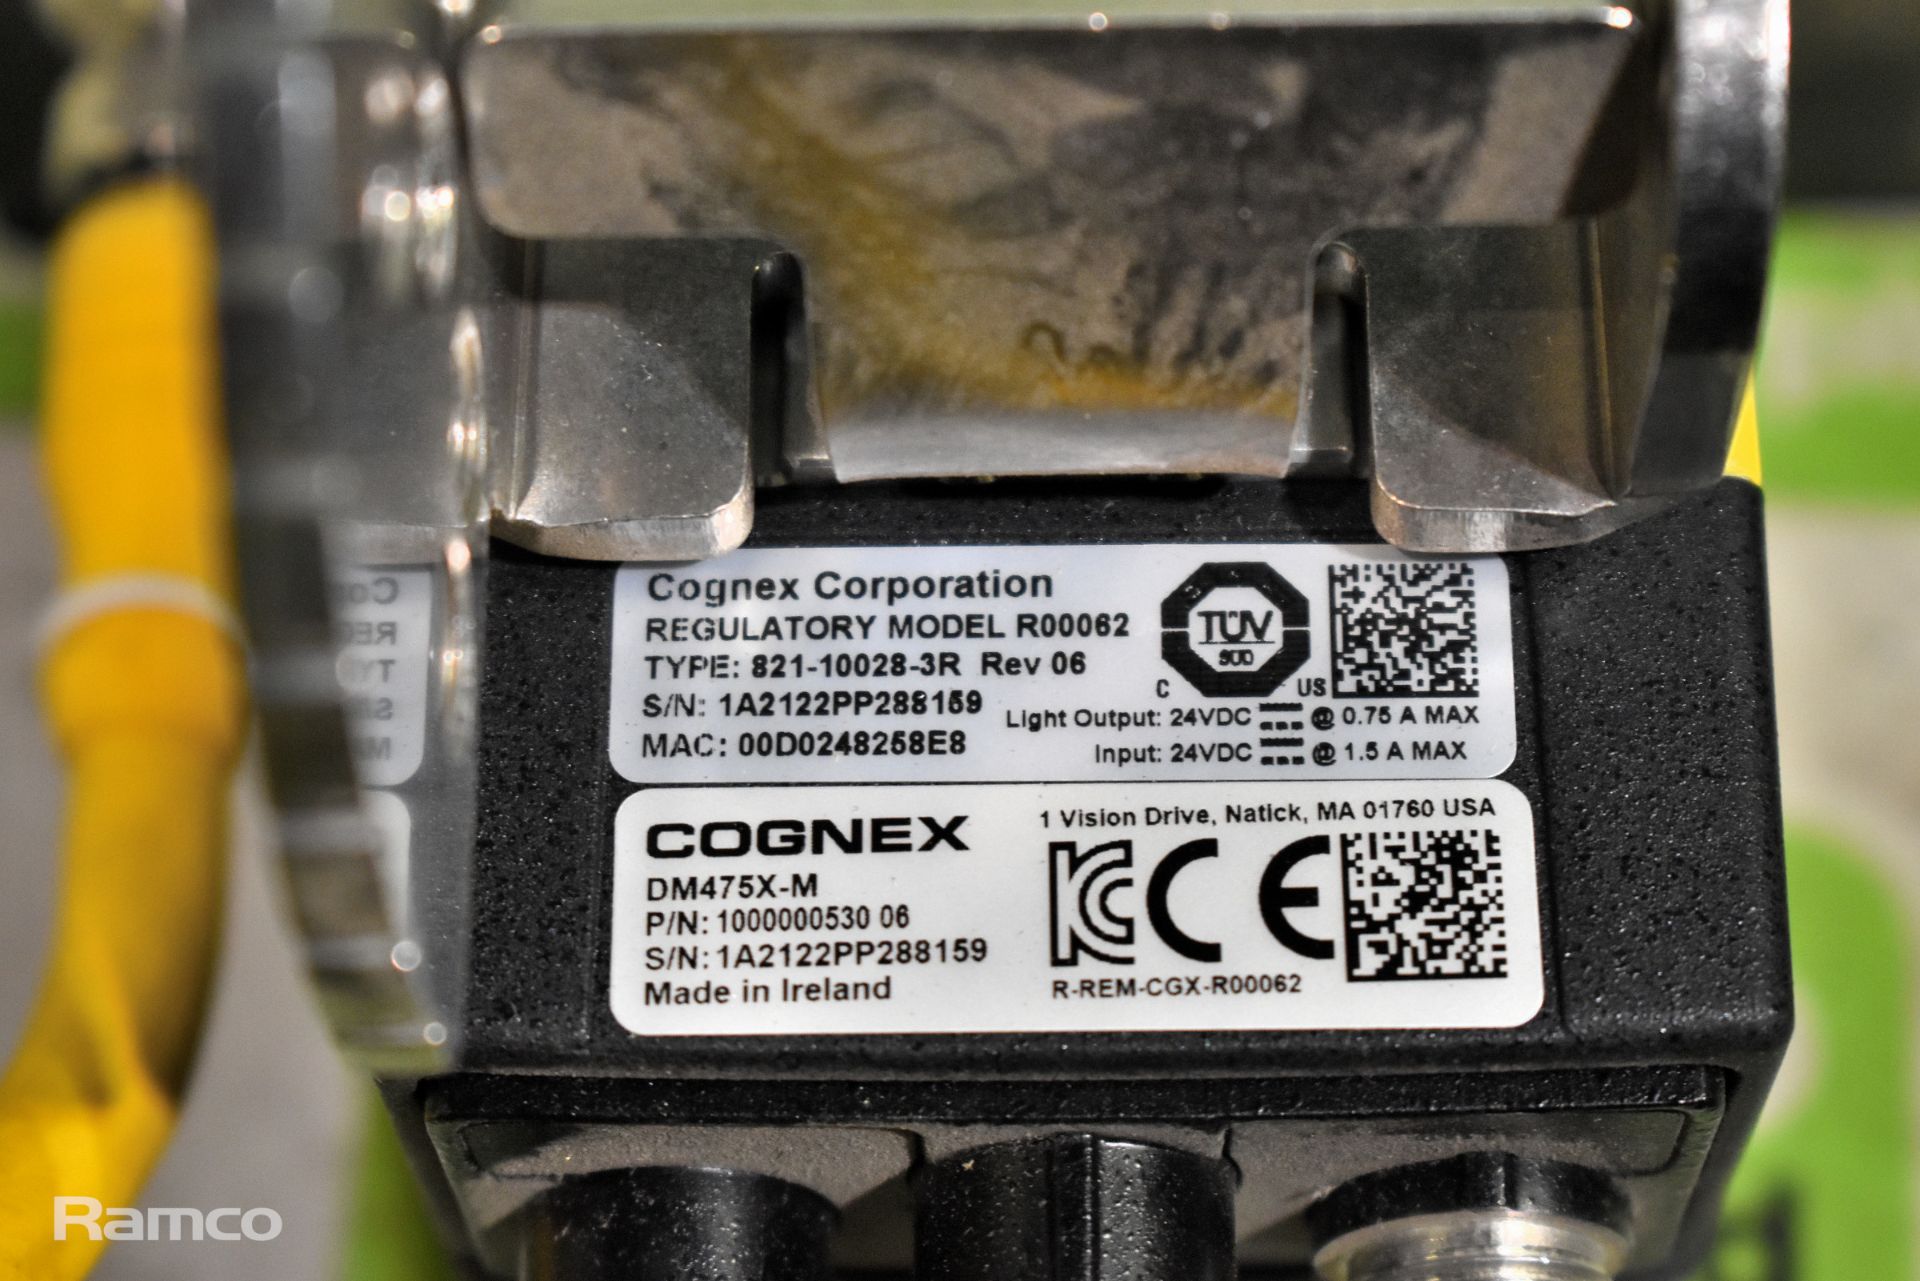 2x Cognex DM475X-M barcode readers - Image 7 of 8